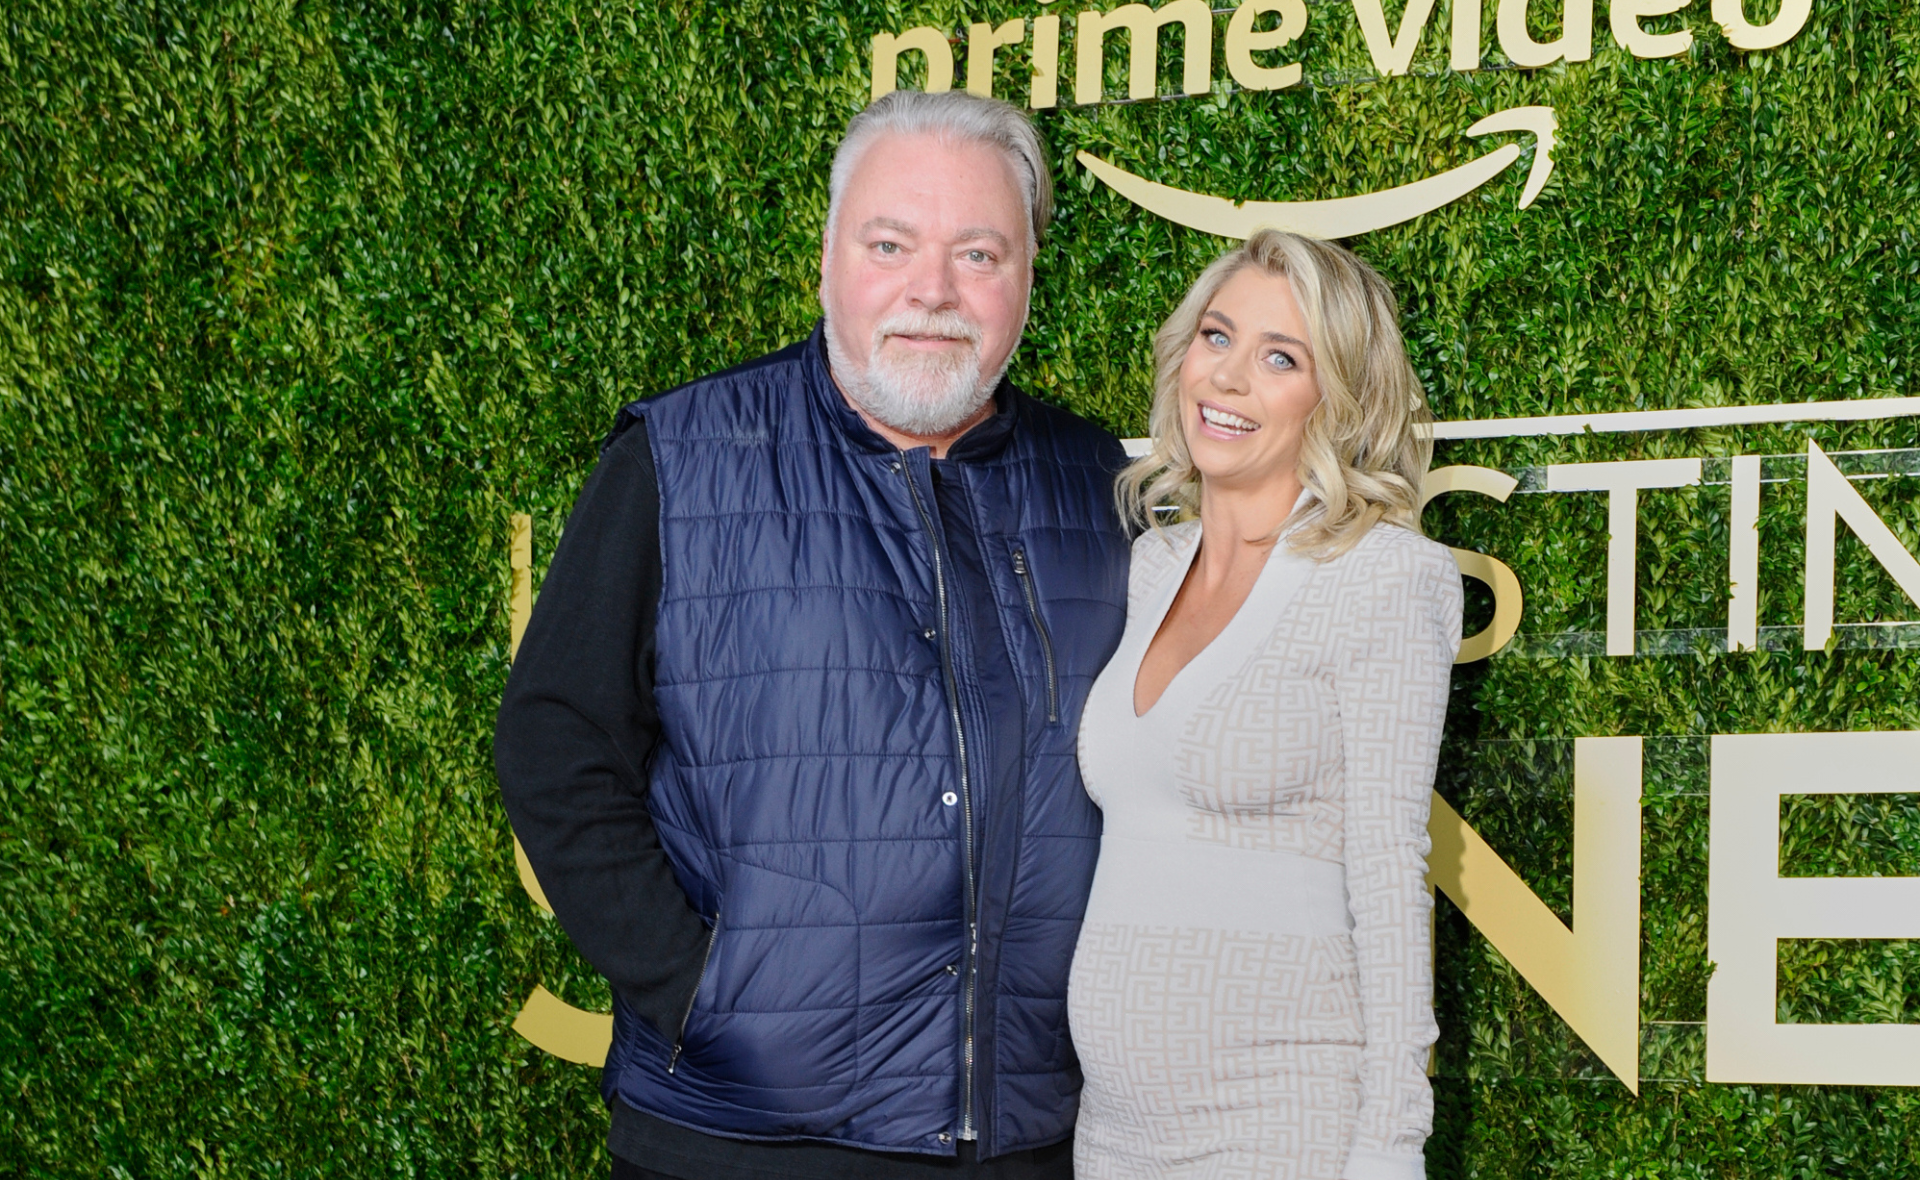 Kyle Sandilands hopes his guests spare no expense as his lavish wedding registery is revealed